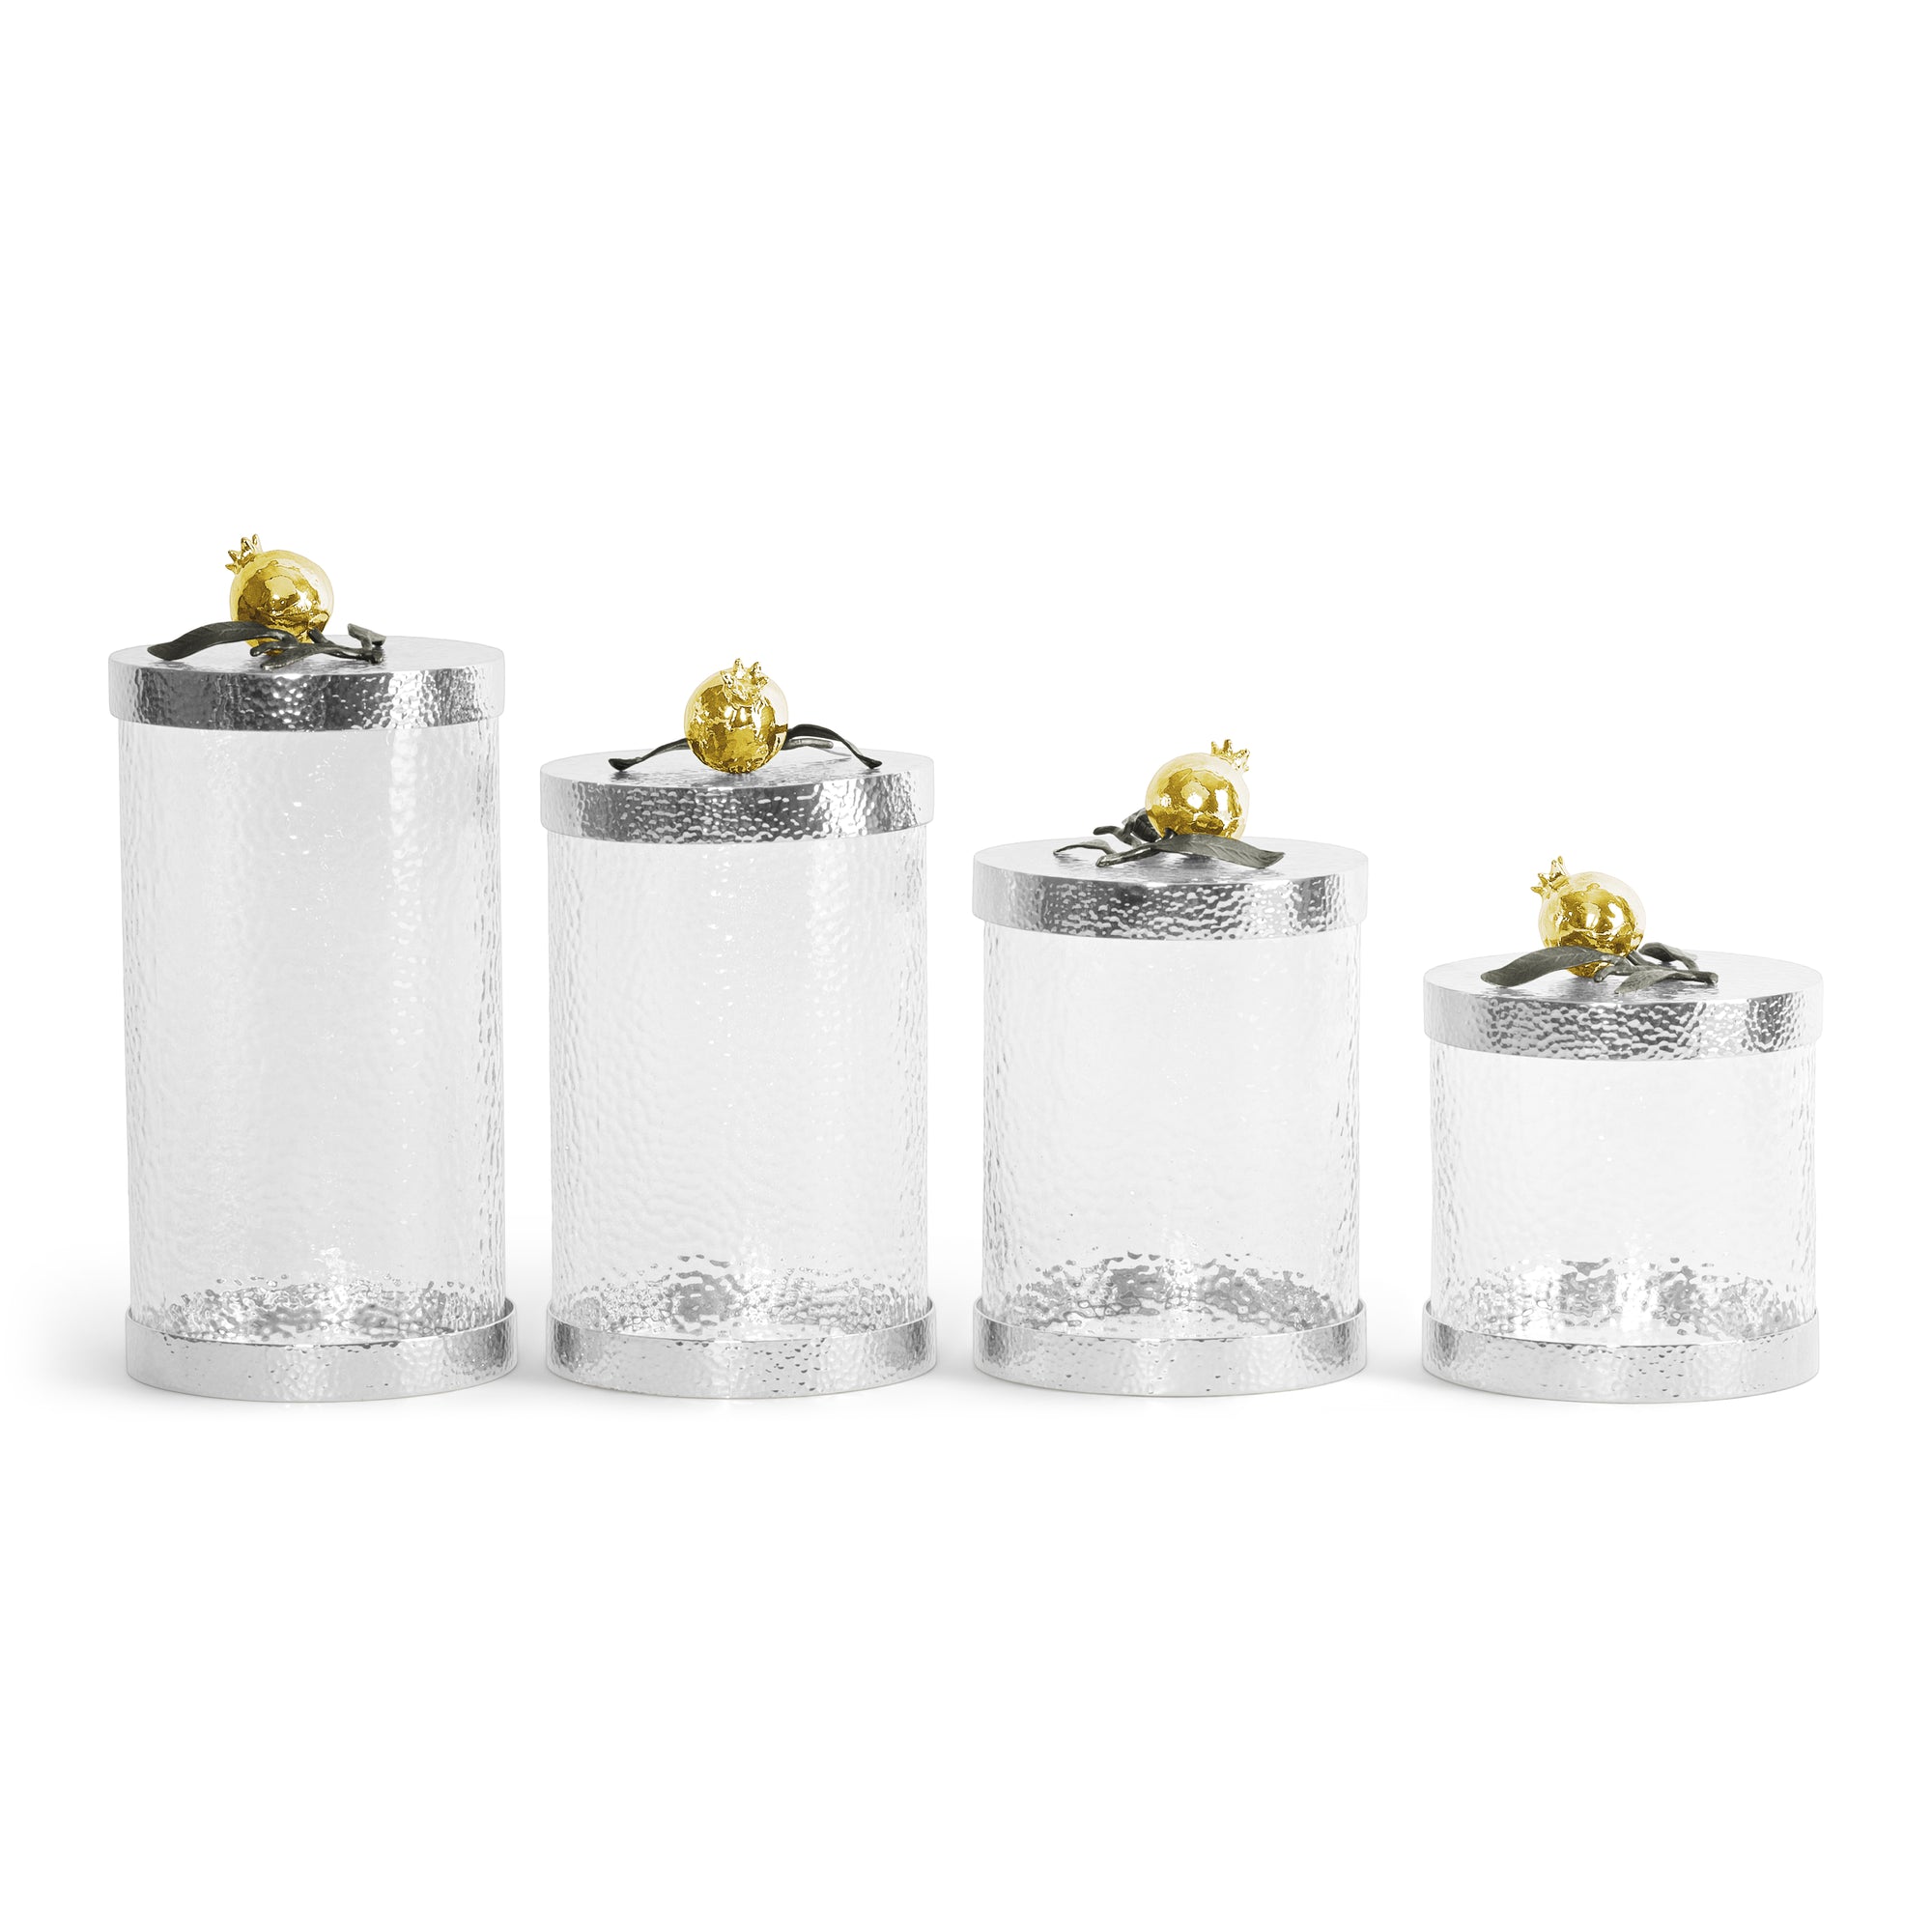 Pomegranate Canisters